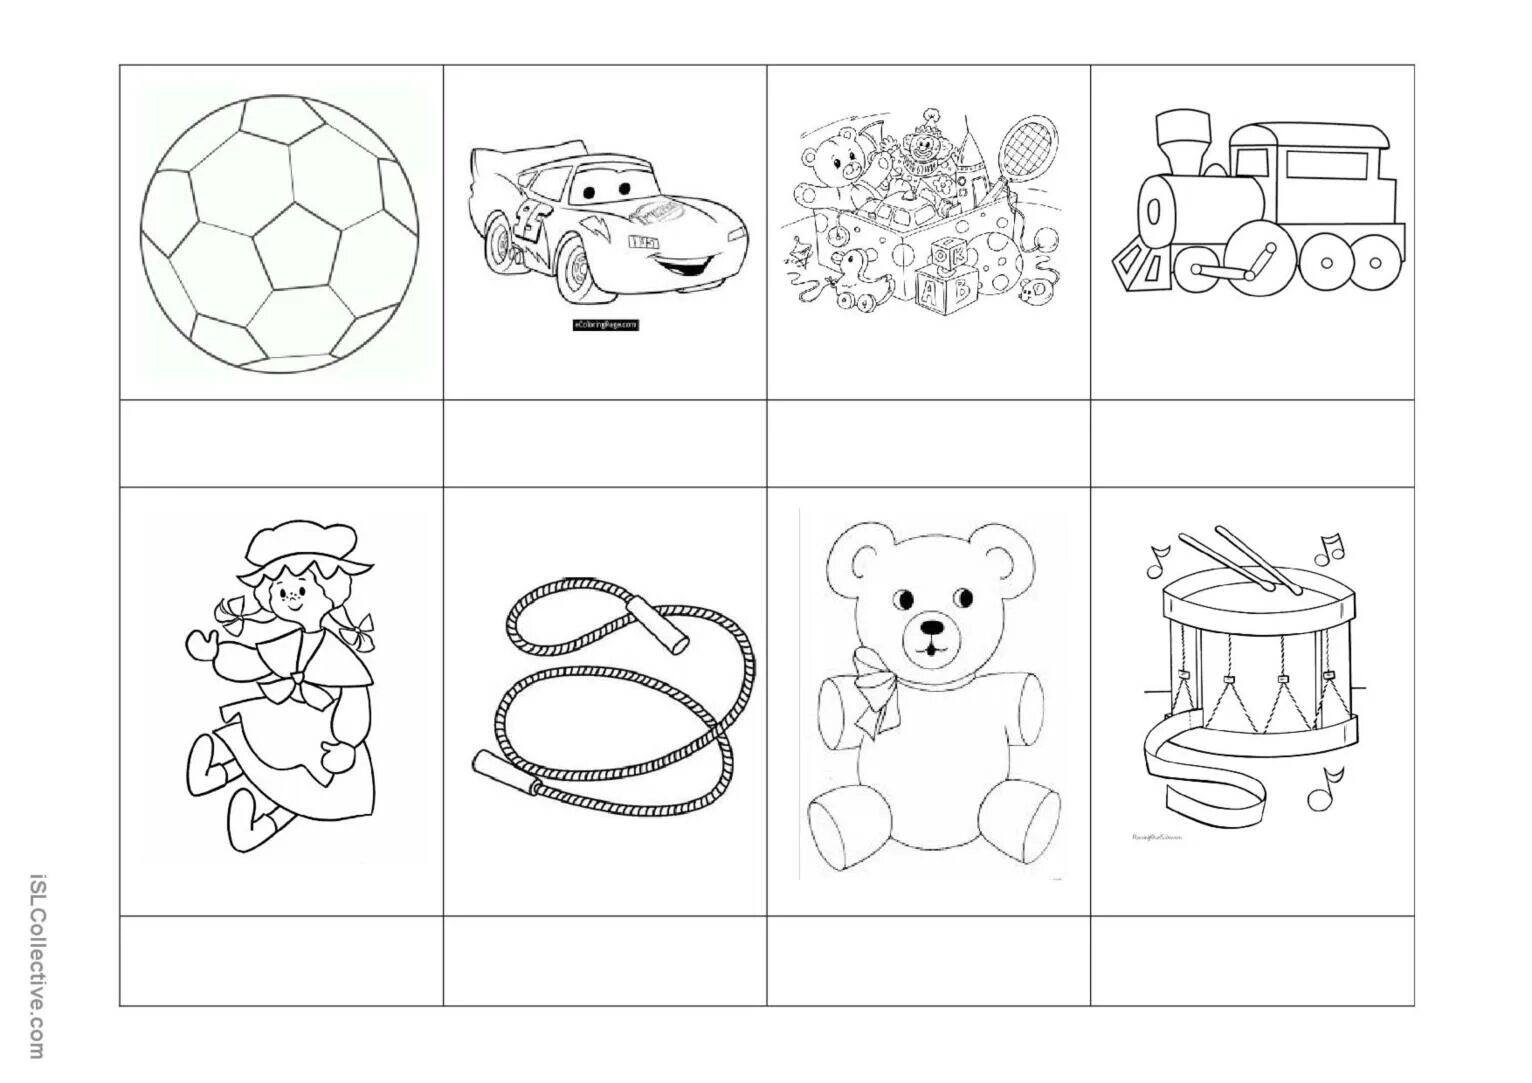 Toys writing. Игрушки Worksheets. Toys Mini book for Kids. My Toys Worksheets. Toys colouring Worksheets.